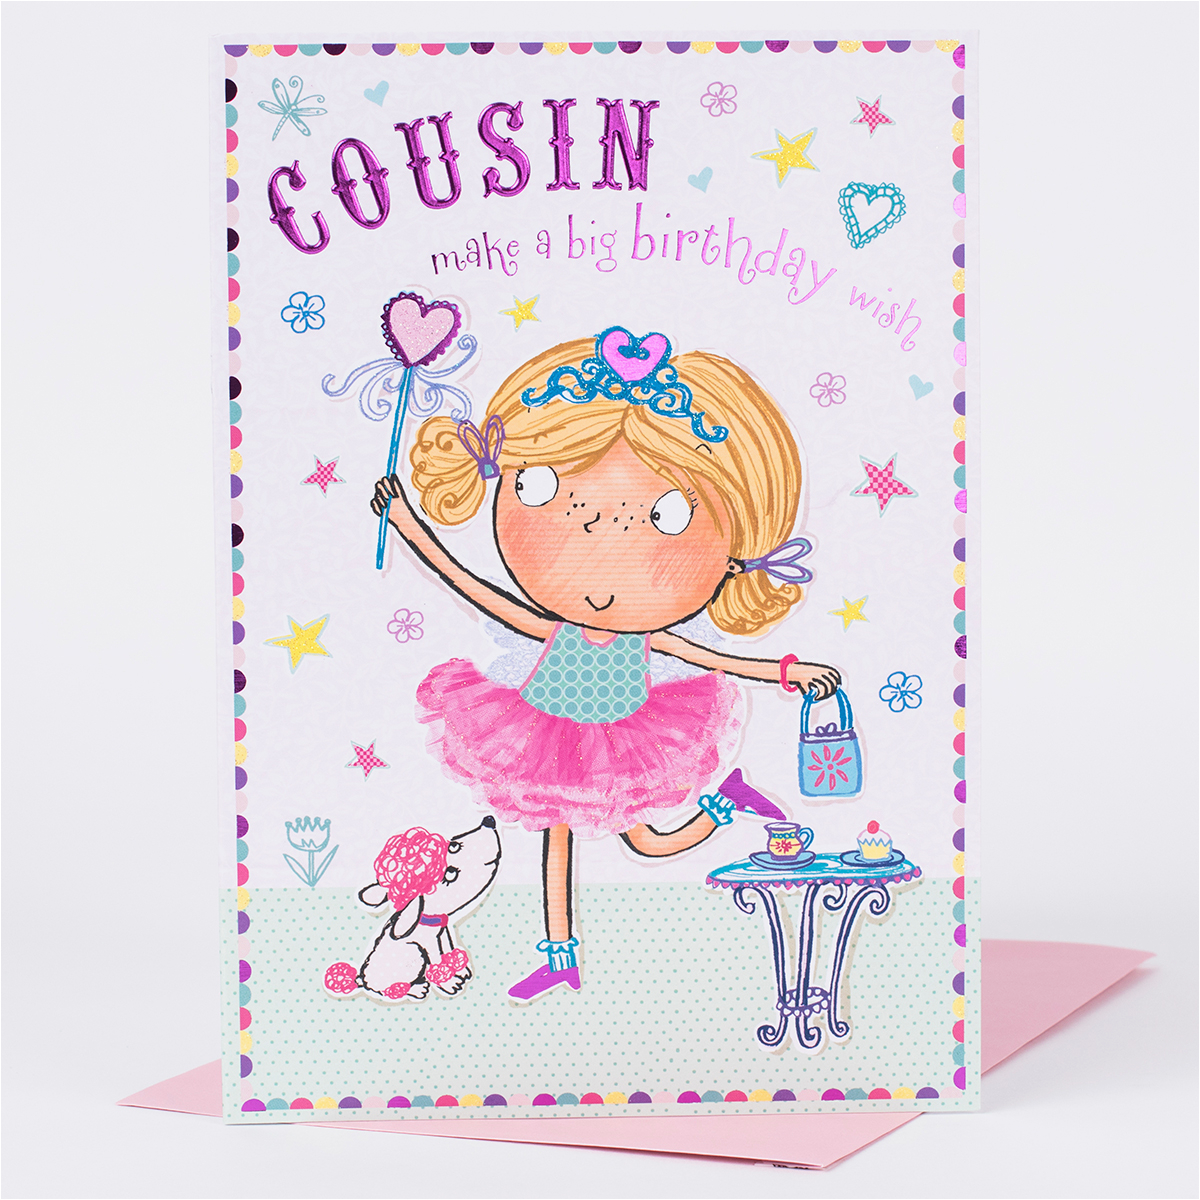 birthday-cards-for-cousins-free-birthday-card-cousin-make-a-big